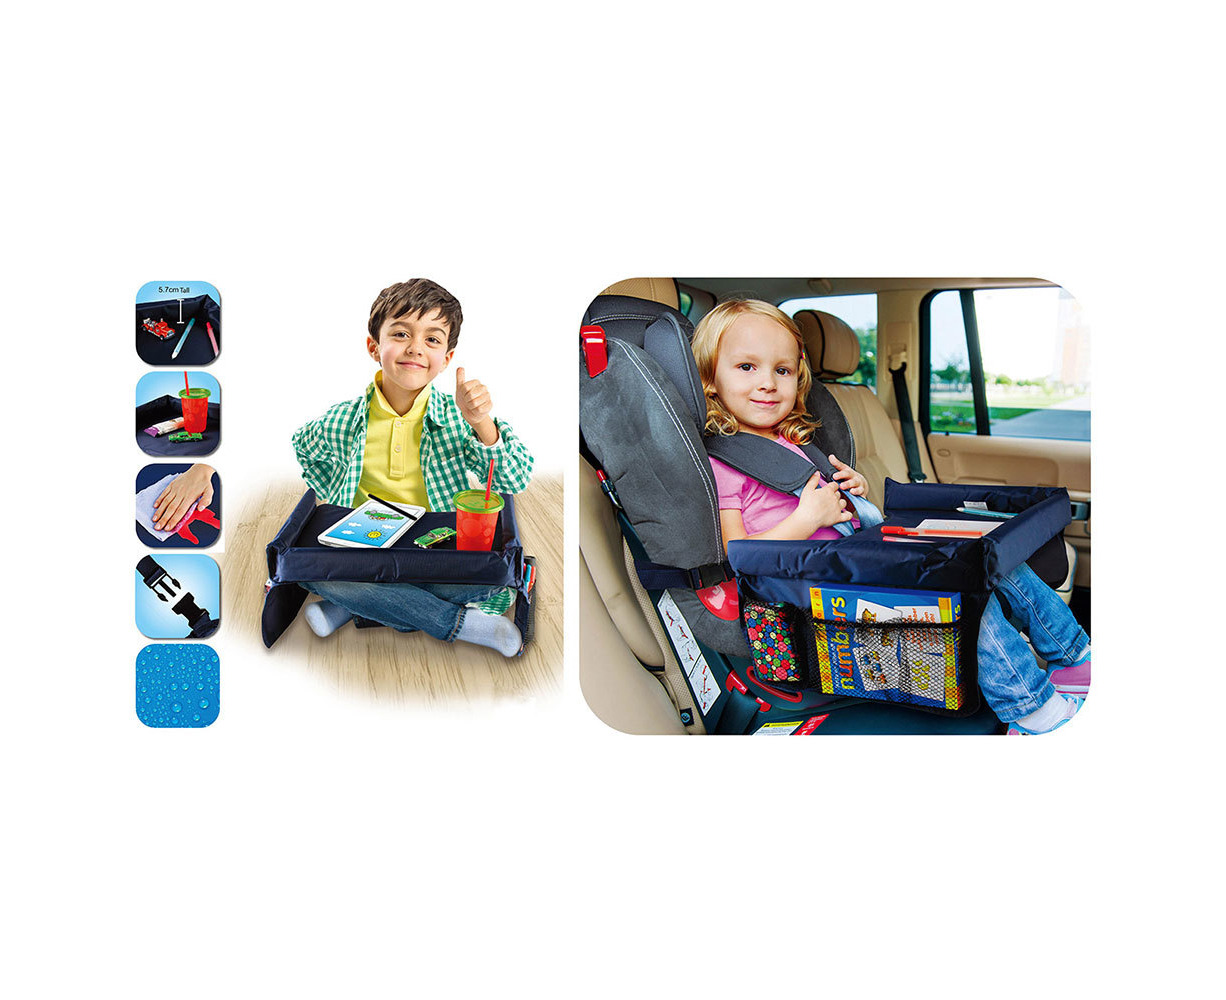 Backseat Storage Play Snack Lap Table Stroller Accessories w Extra Bonus Kids Travel Tray On The Go Activity Desk for Children Toddlers Detachable Top 4-in-1 Car Organizer w Tablet Holder 